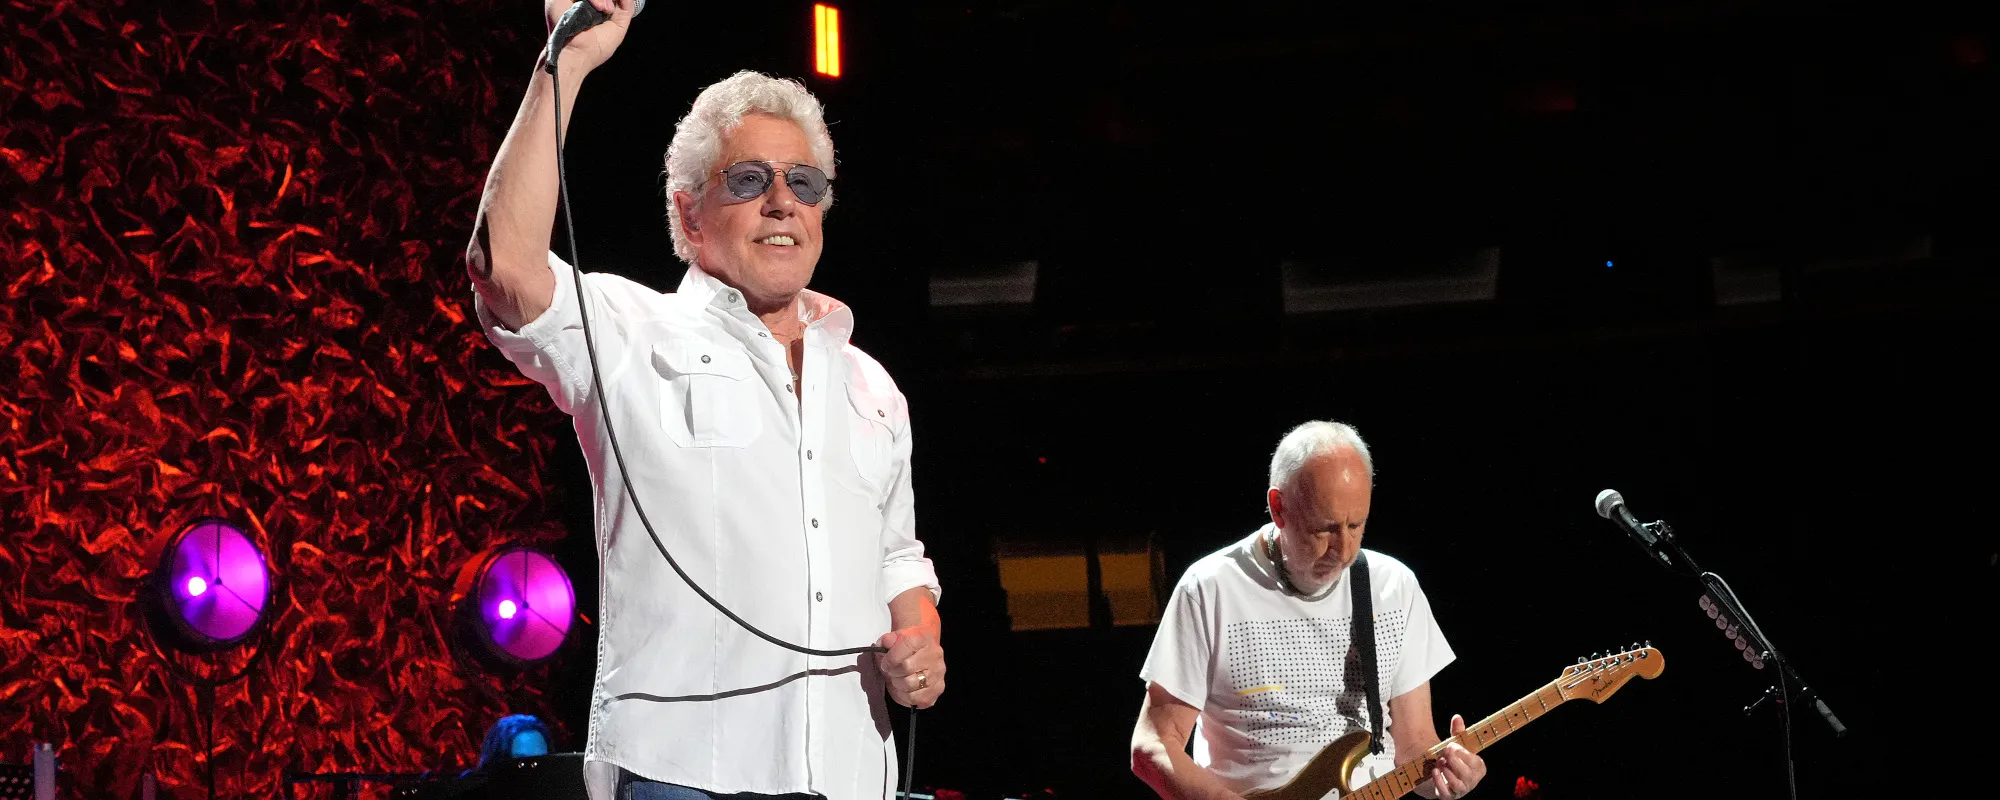 The Story Behind the Rocky Relationship of The Who’s Roger Daltrey and Pete Townshend